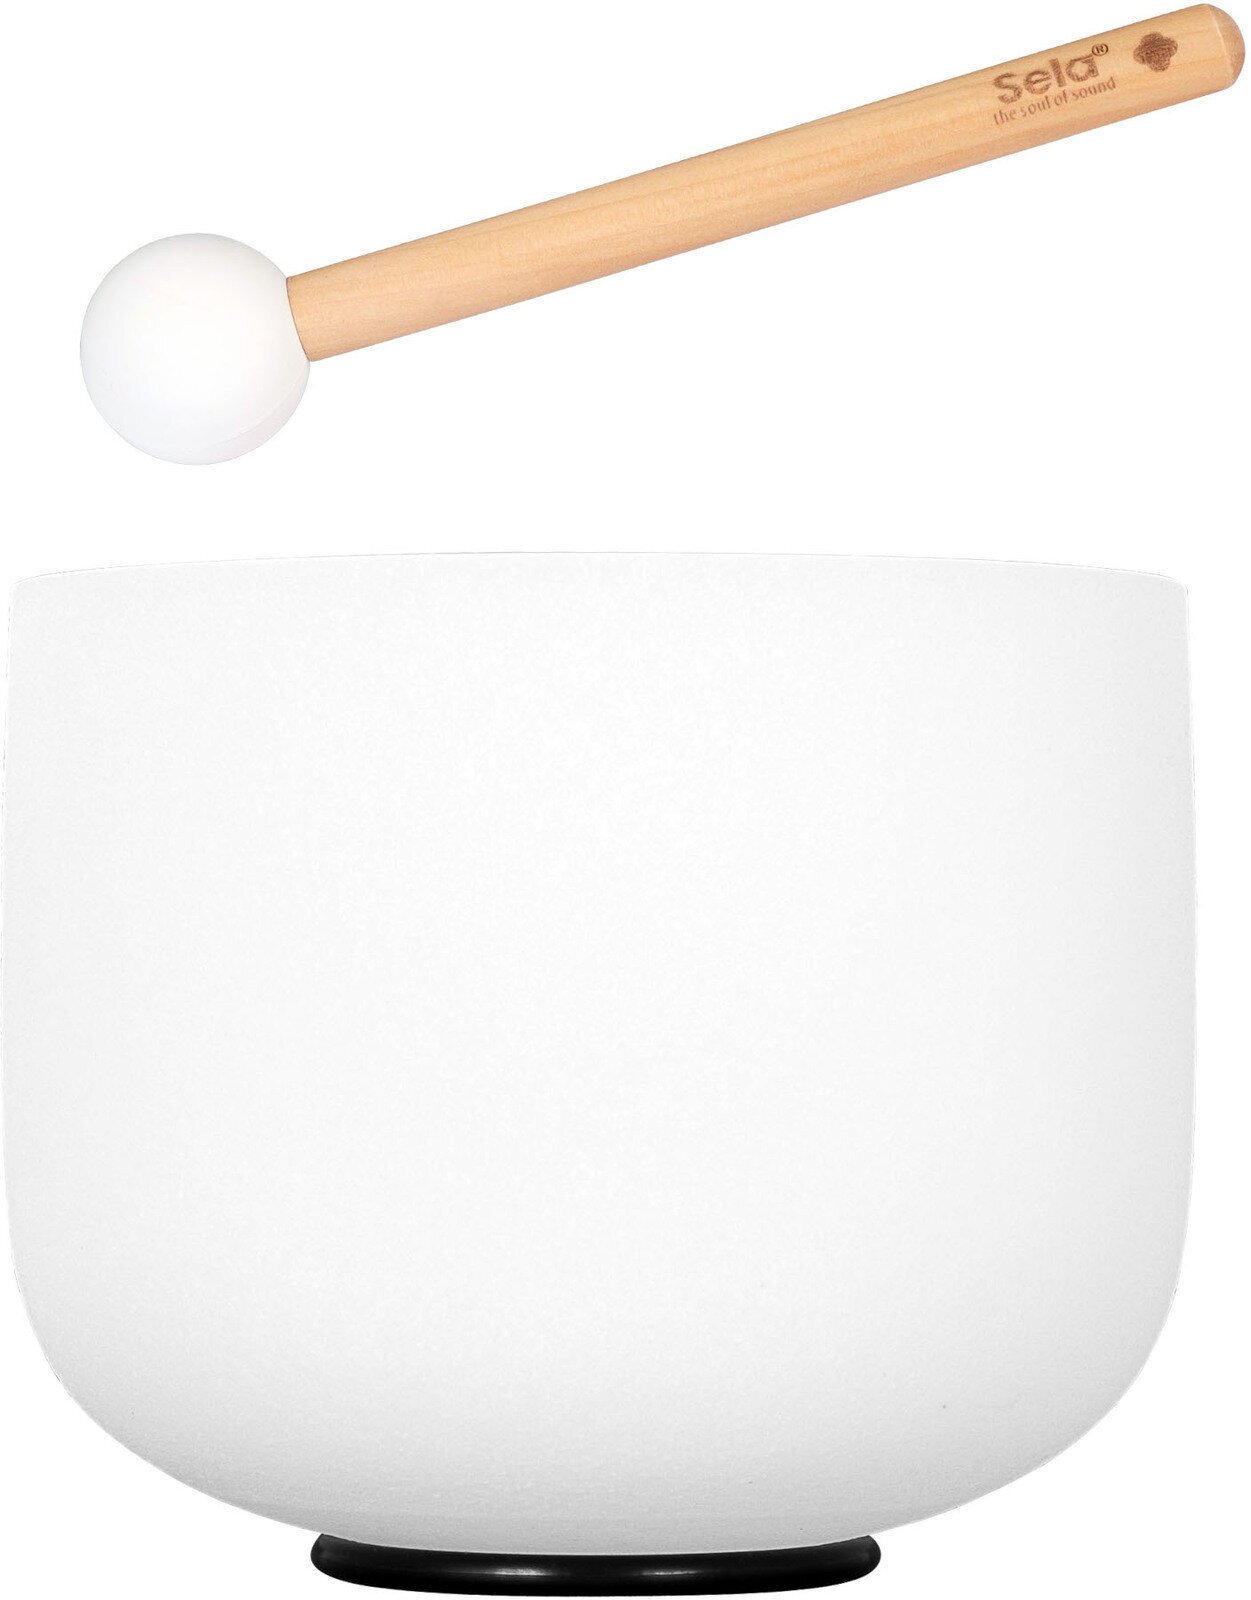 Percussion für Musiktherapie Sela 8" Crystal Singing Bowl Frosted 440 Hz G incl. 1 Wood Mallet